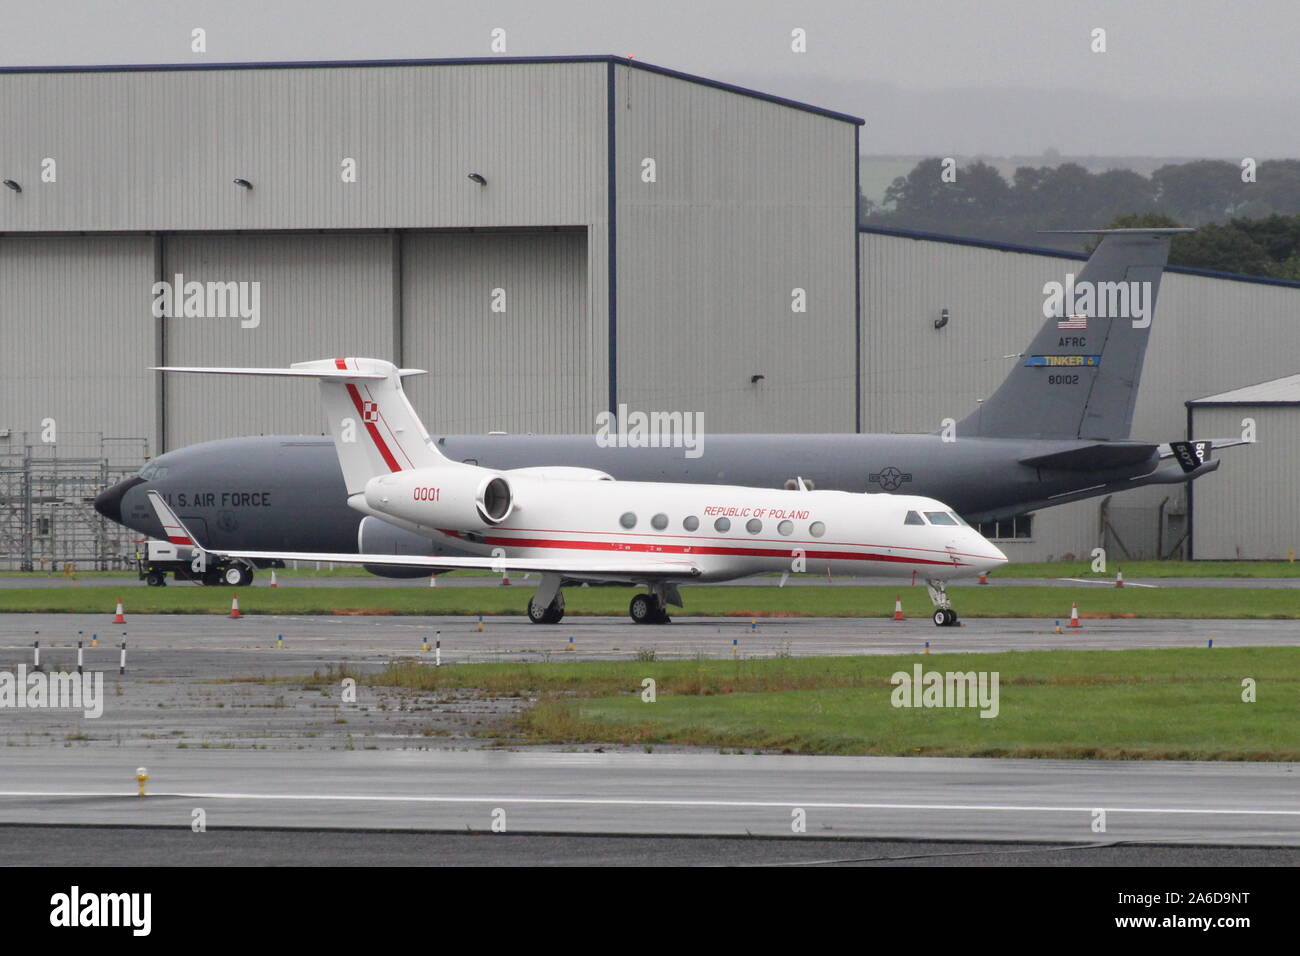 0001, one of two Gulfstream Aerospace G550 VIP transport aircraft serving with the Polish Air Force, at Prestwick International Airport in Ayrshire. Stock Photo